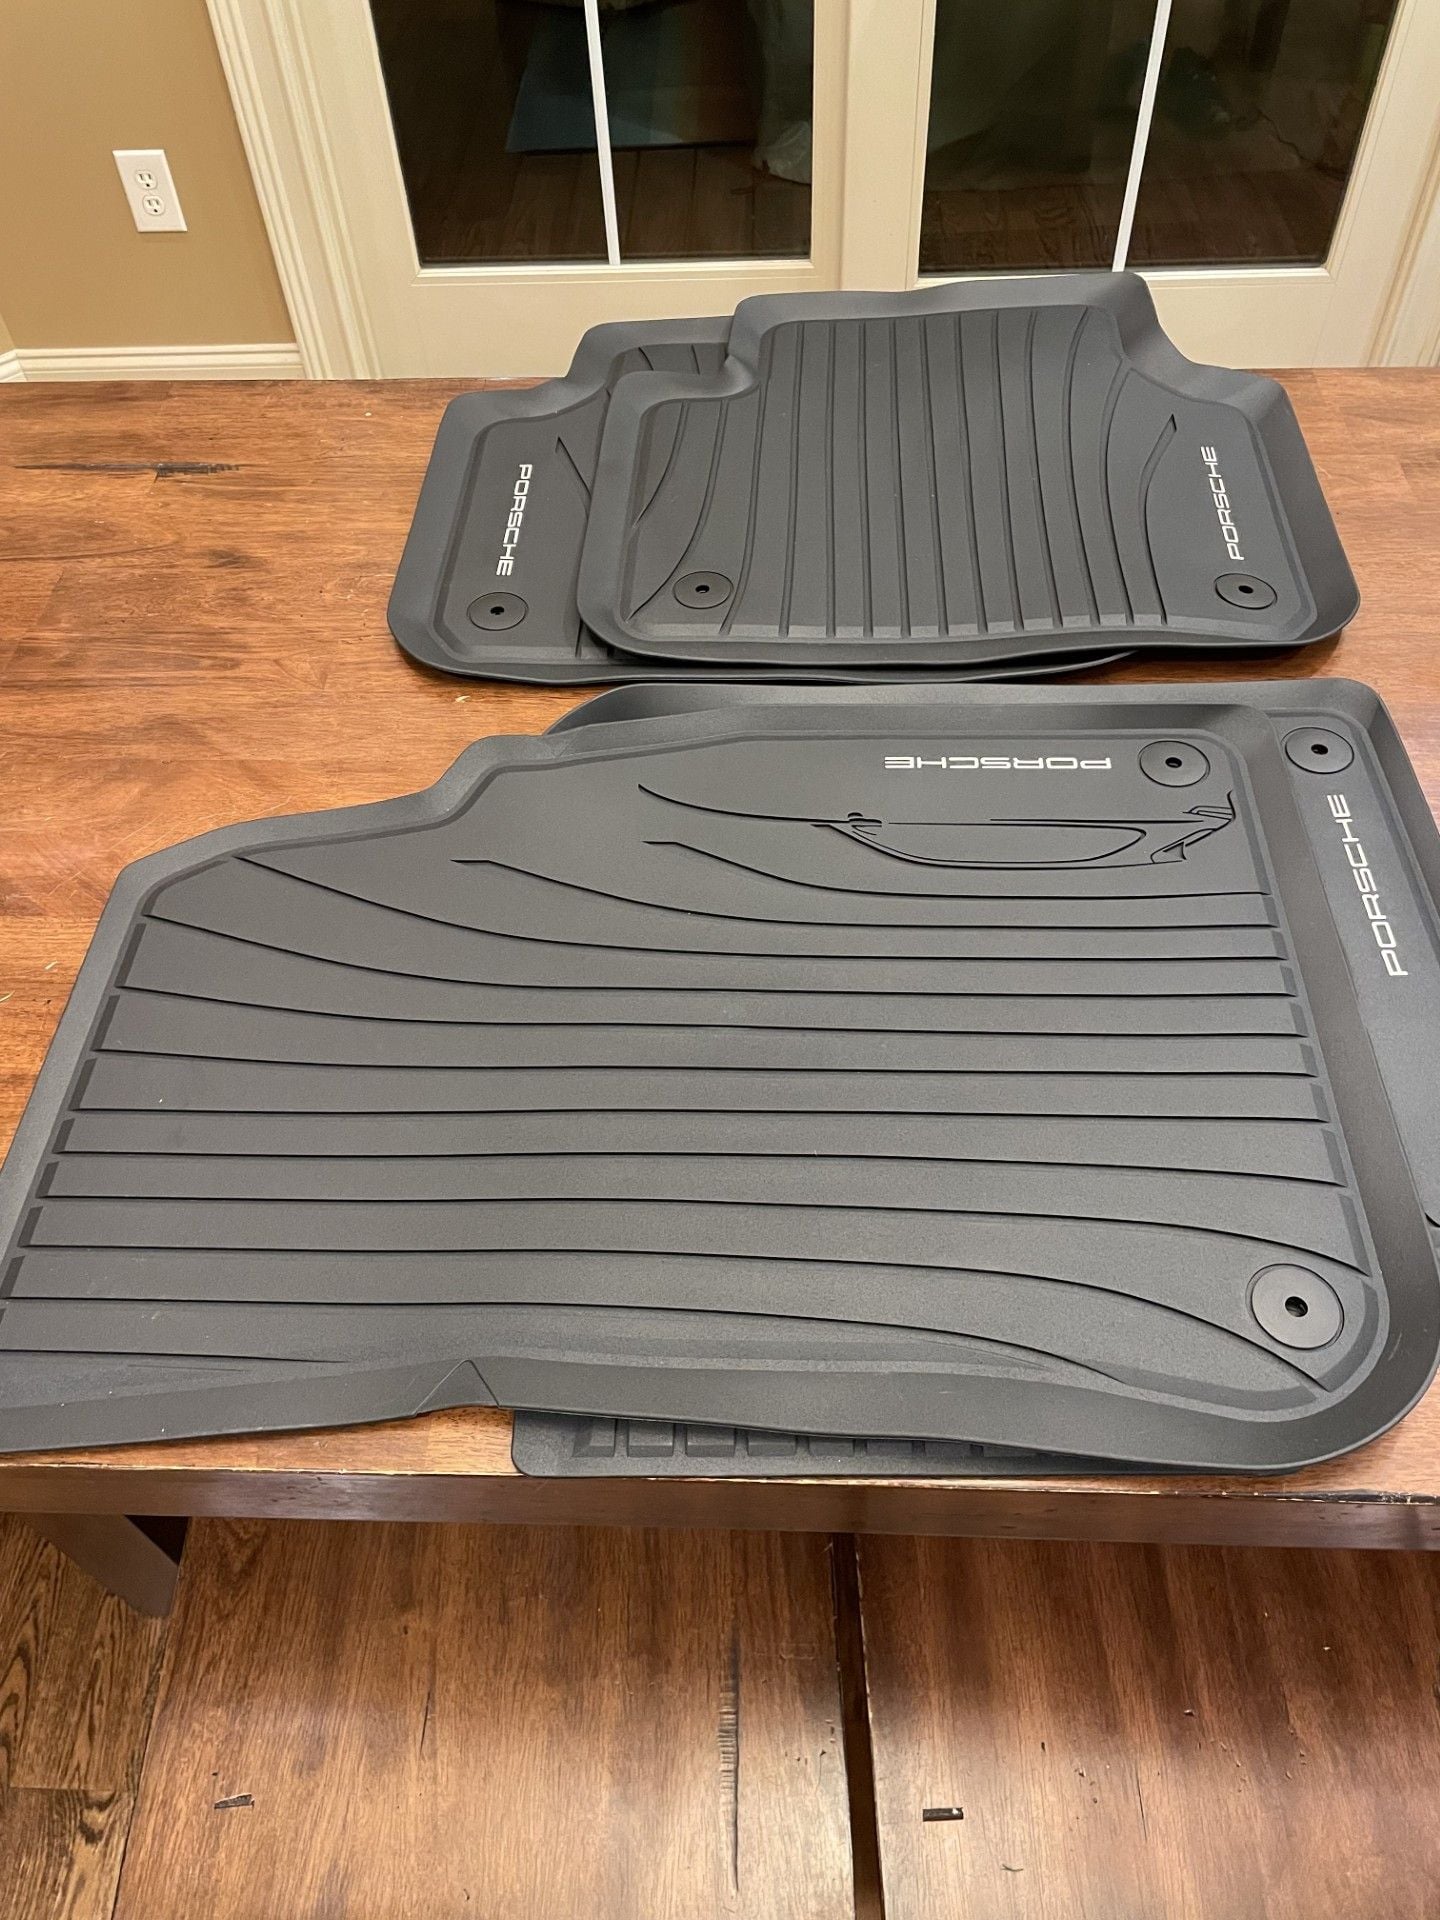 Accessories - New OEM Cayenne 9Y0 Rubber floor mats - New - Tri Cities, TN 37664, United States